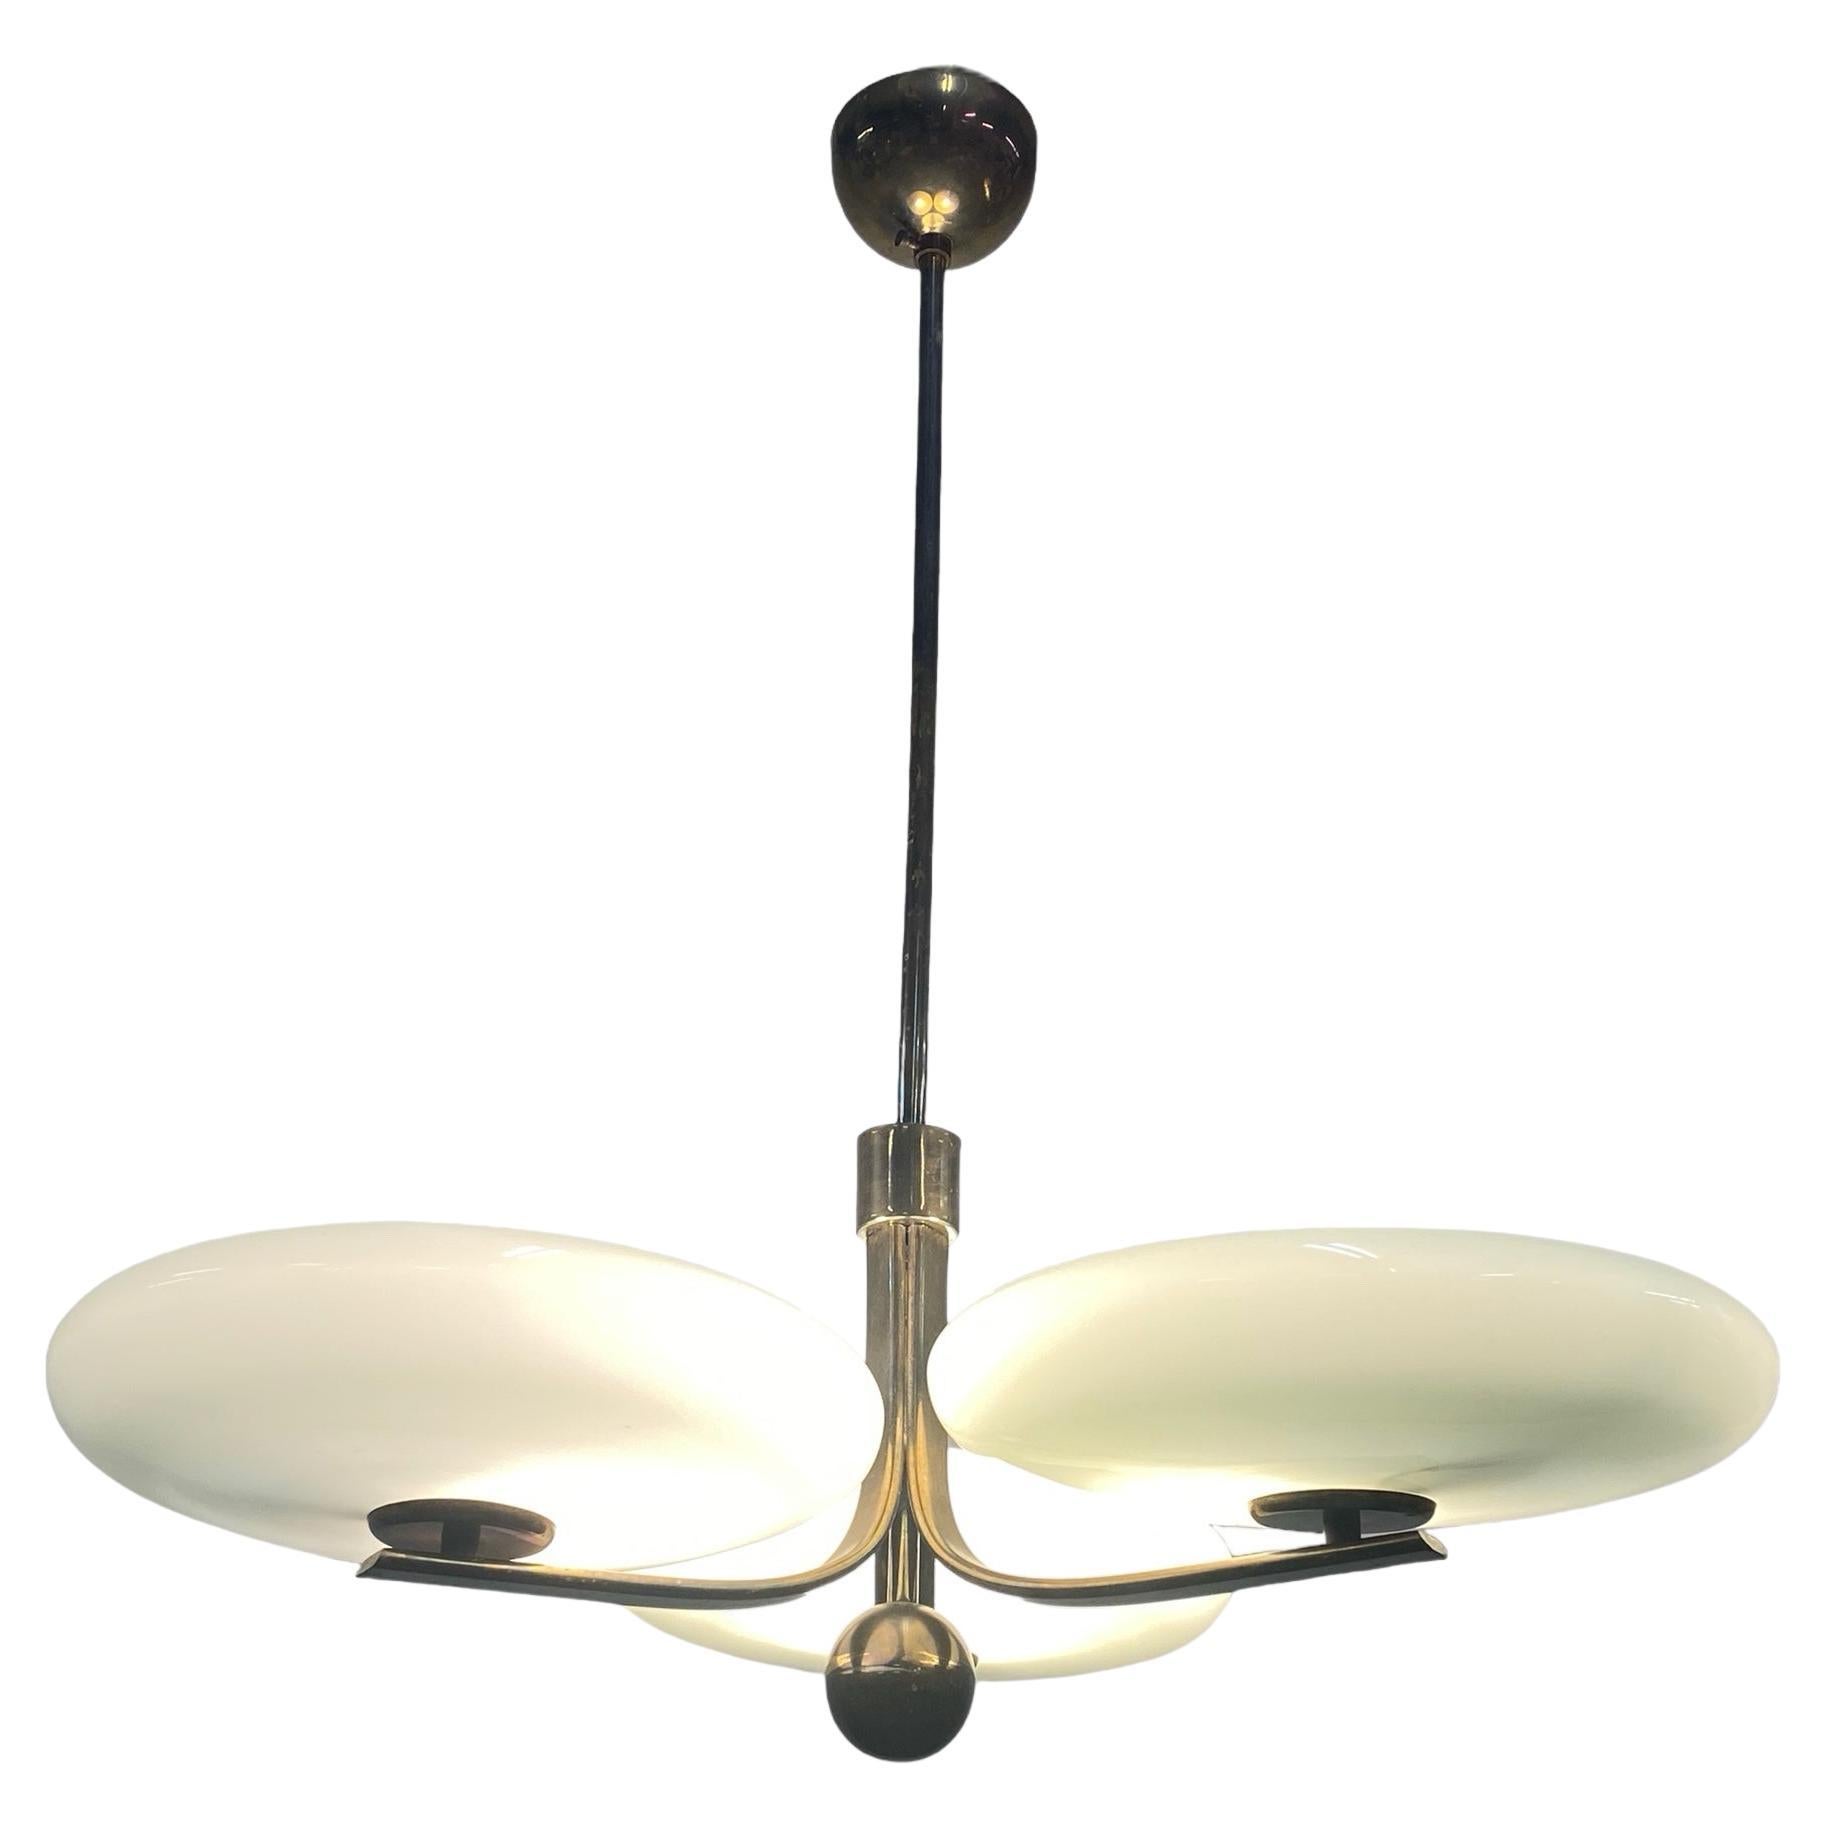 An Early 1930s Paavo Tynell Ceiling Lamp in Full Original Condition